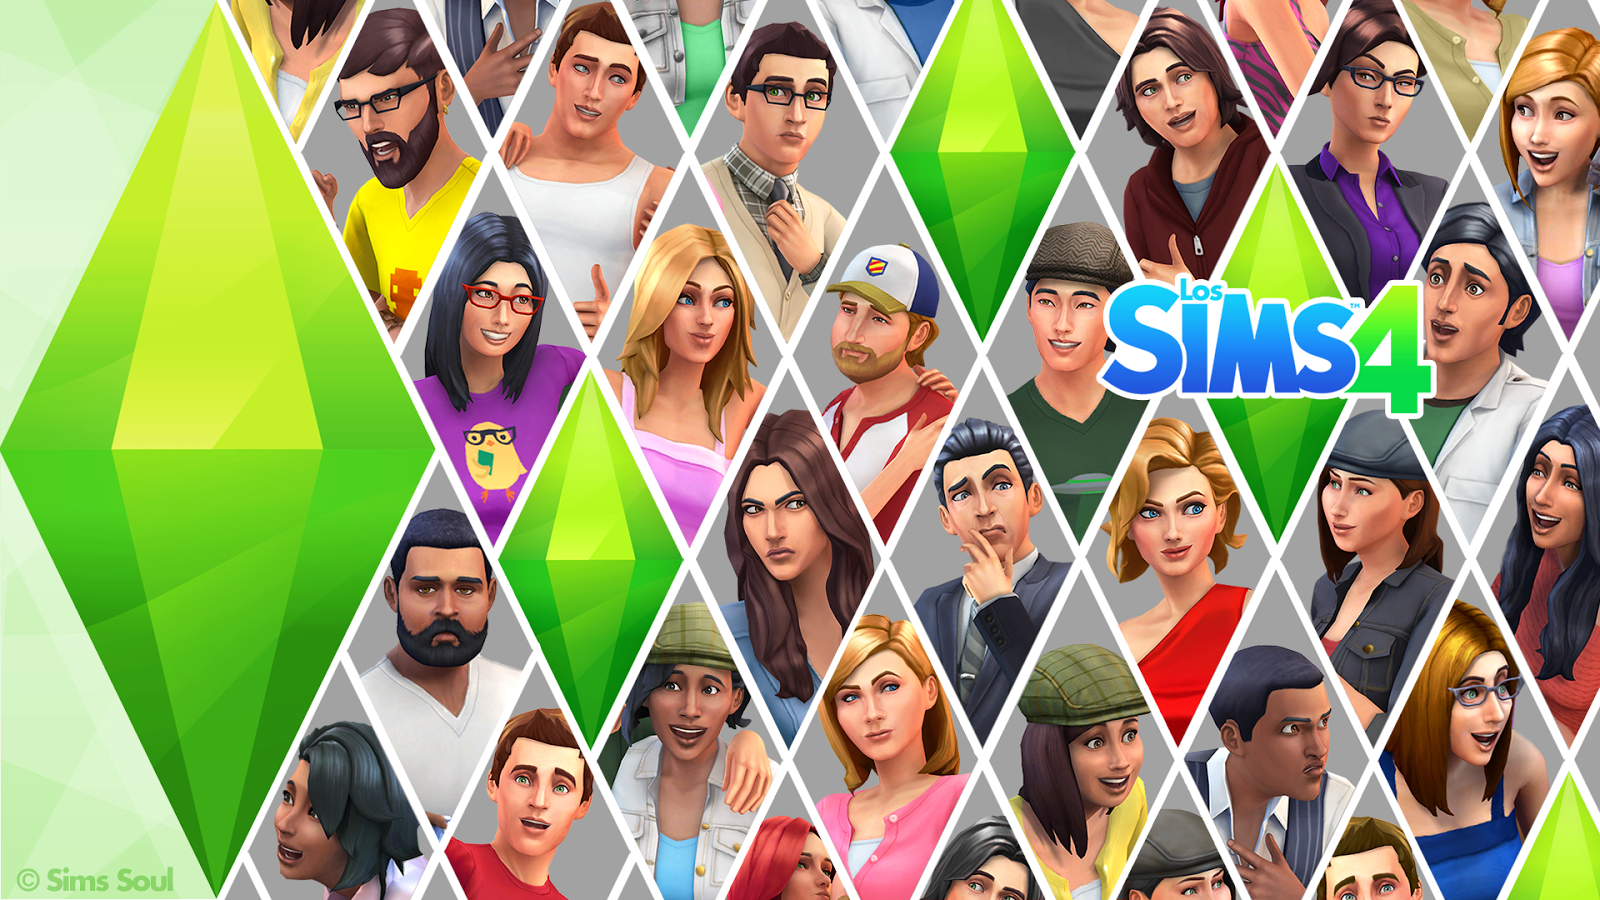 The Sims 4 (фото)